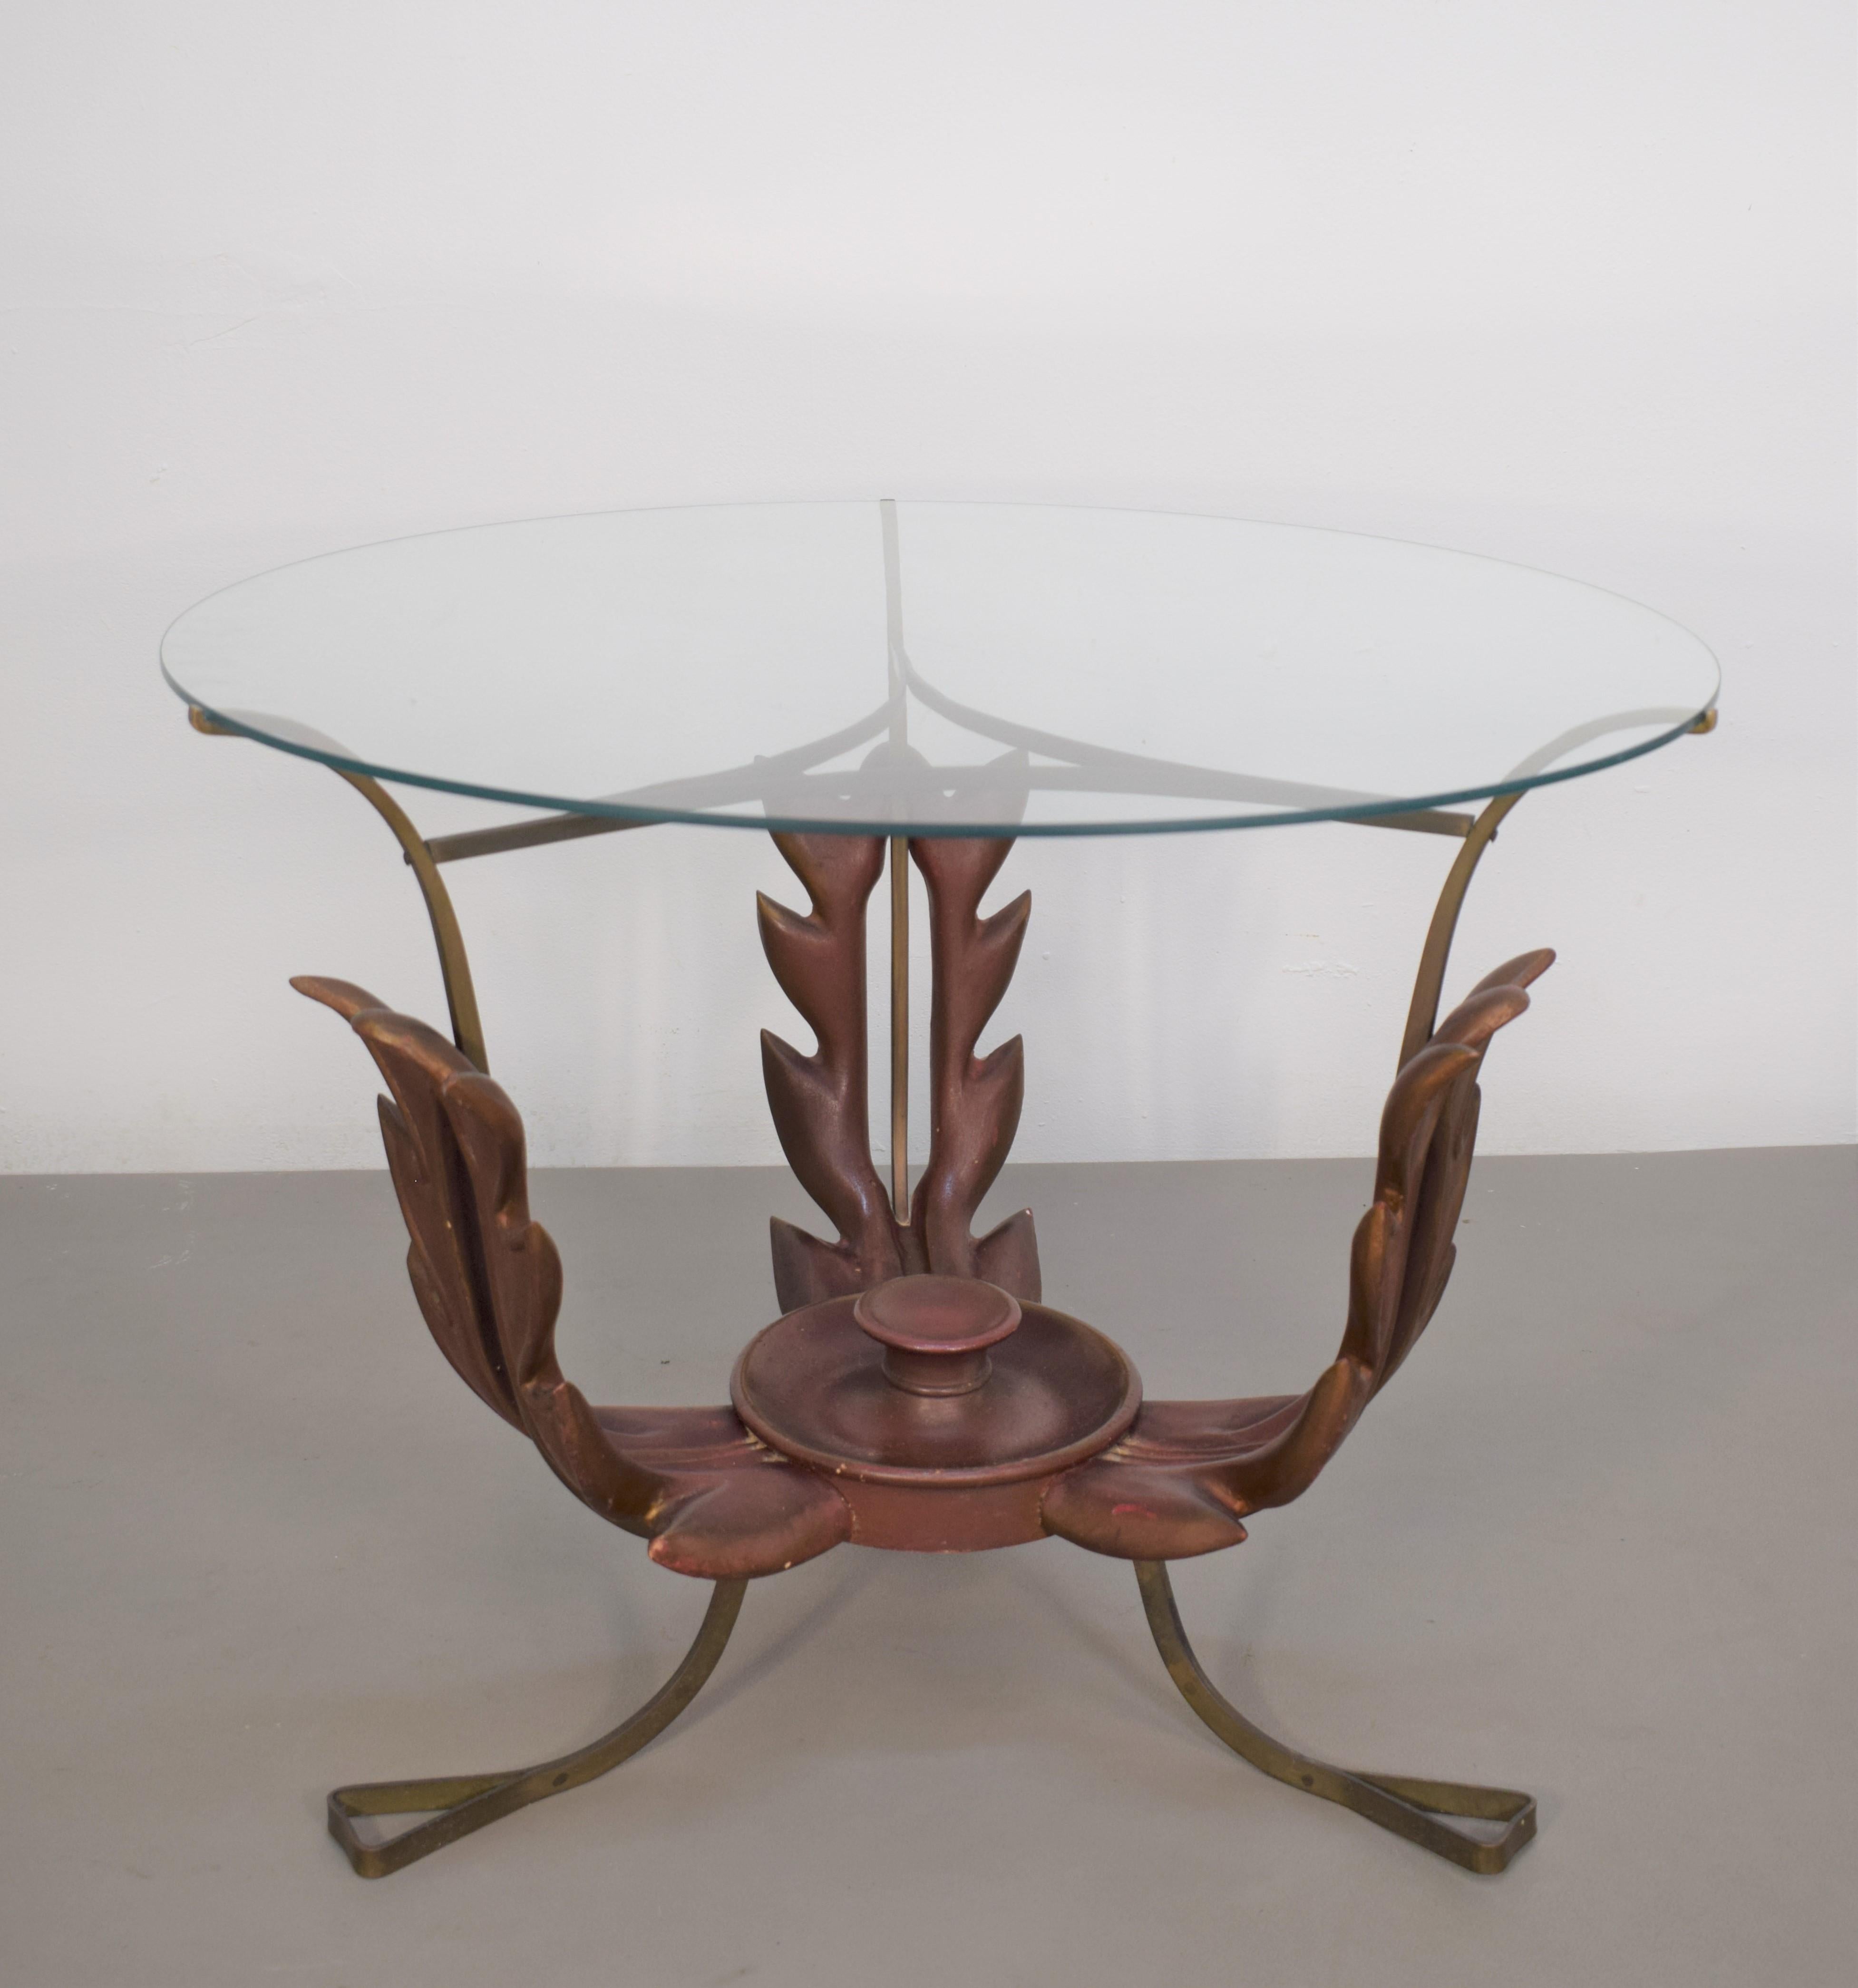 Italian coffee table by Pier Luigi Colli, brass, wood and glass, 1940s.

Dimensions: H= 51cm; D=66 cm.